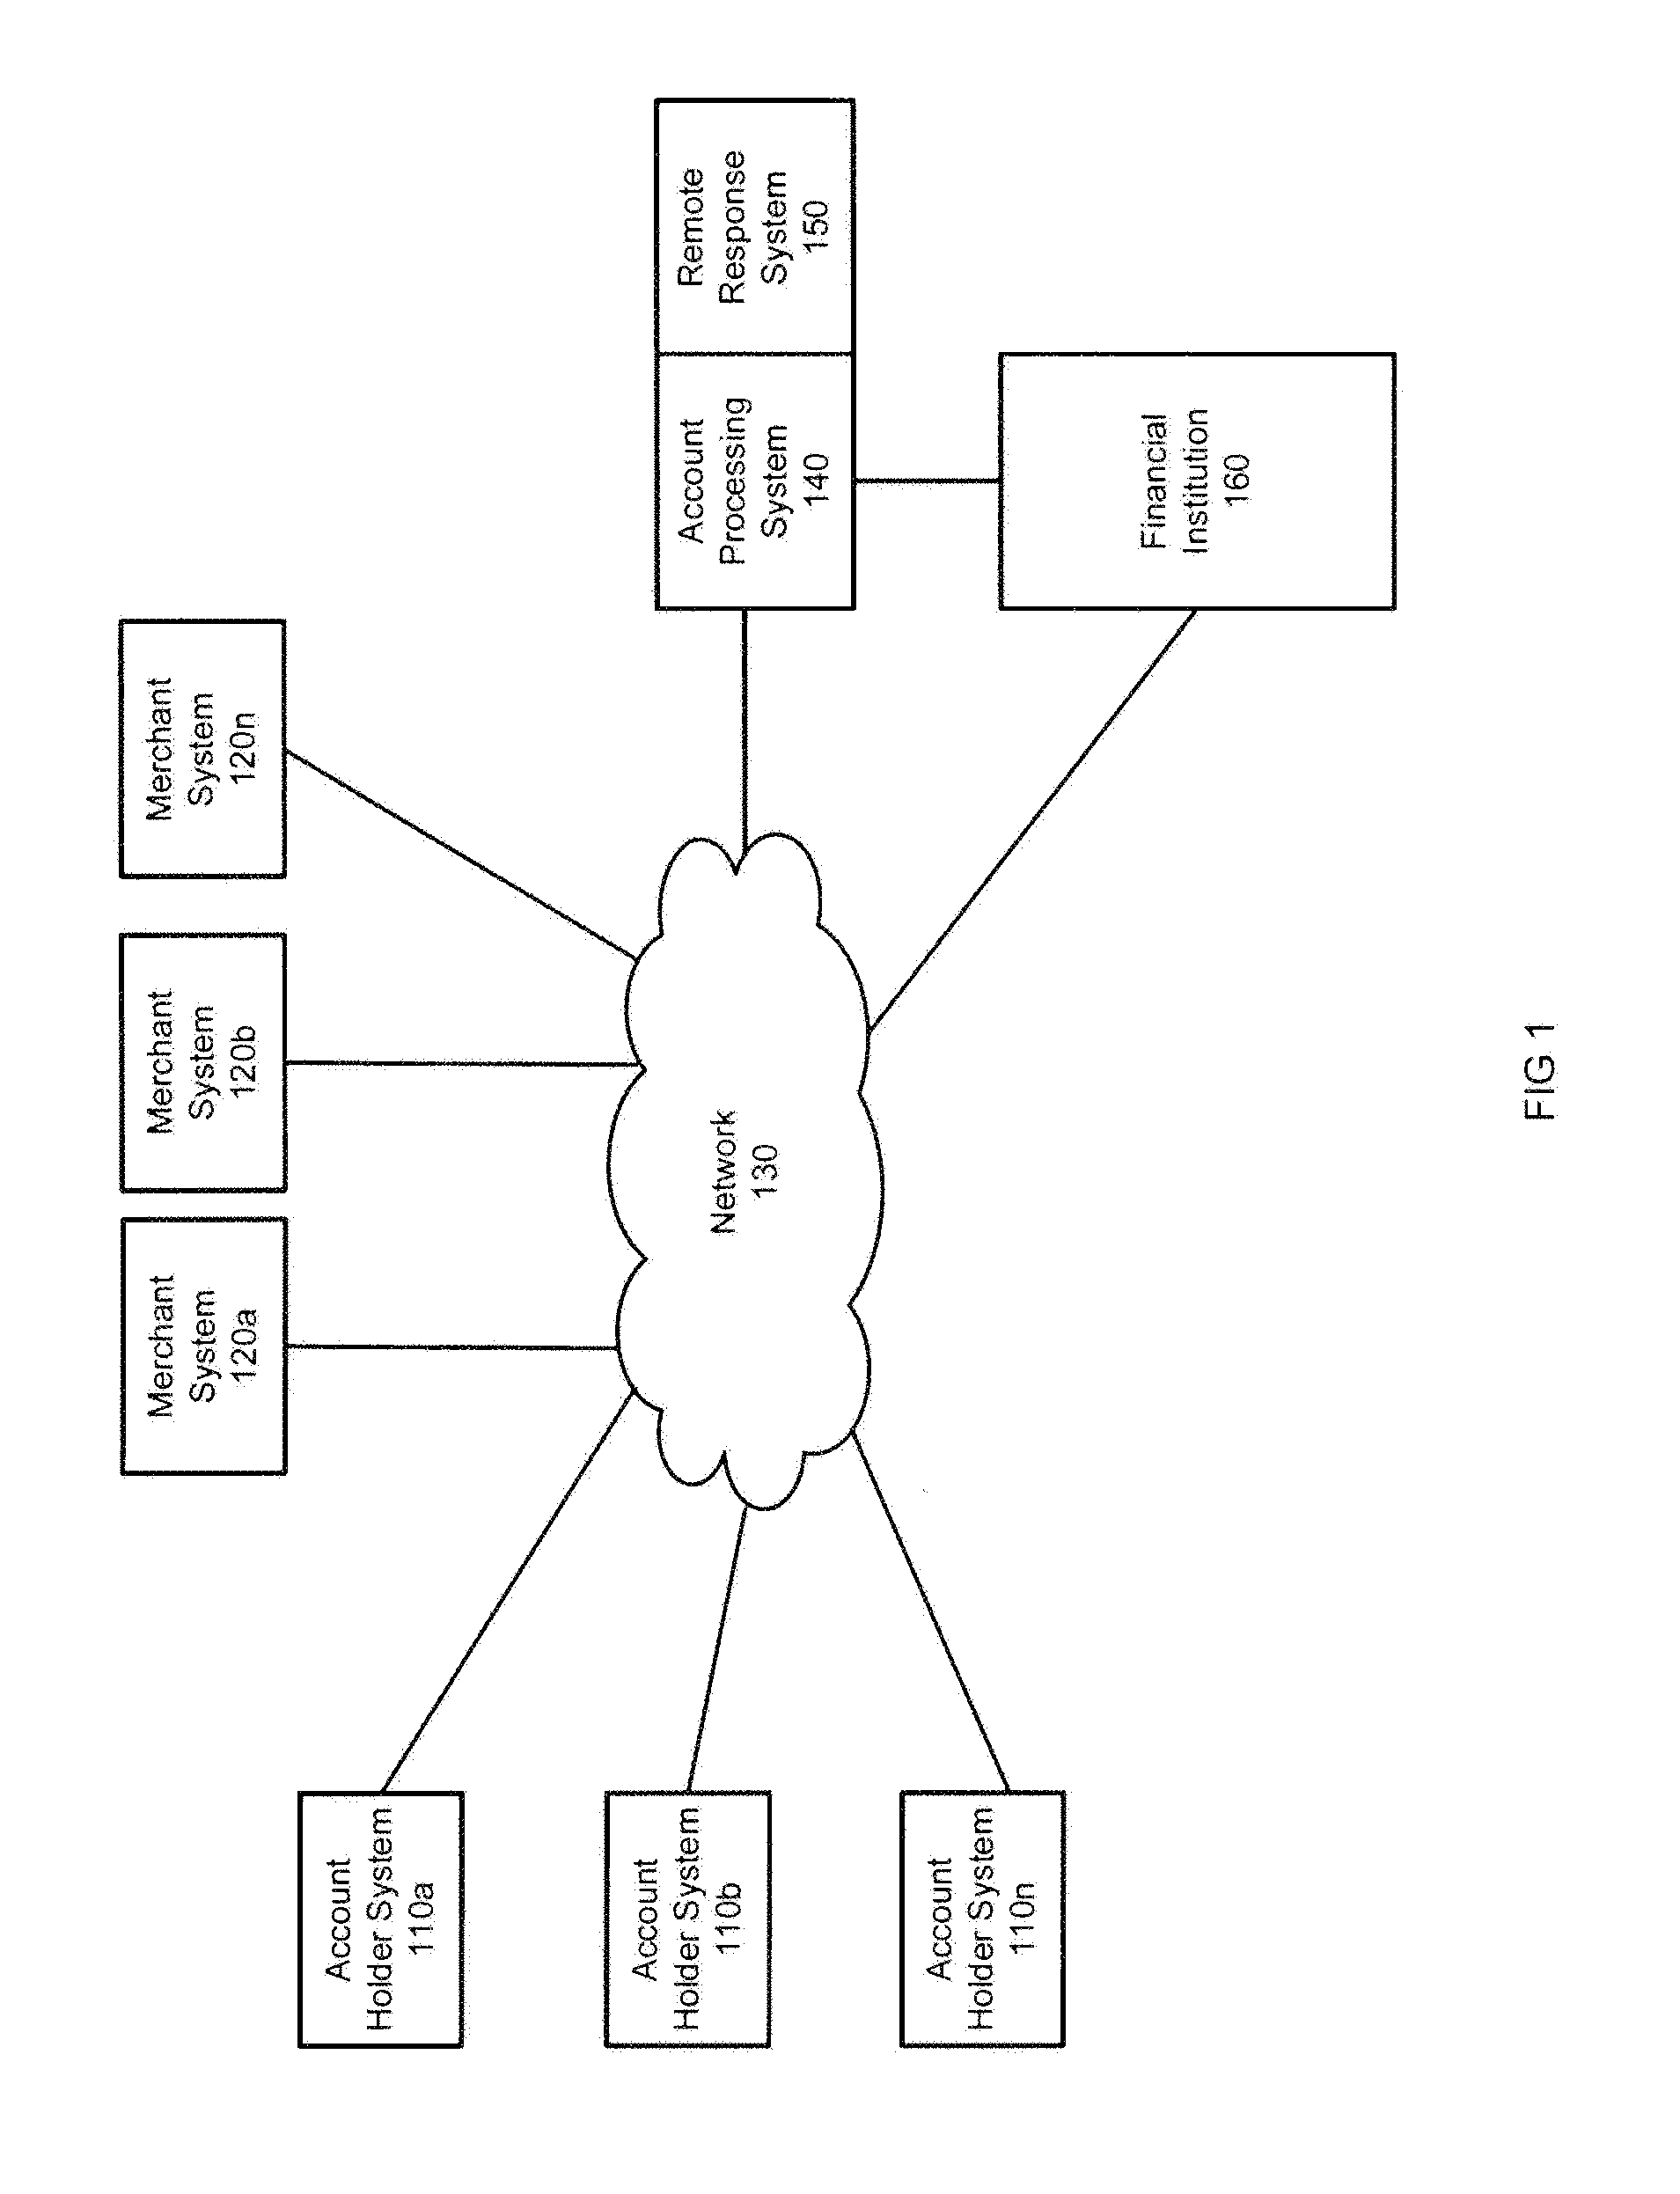 Remote account control system and method